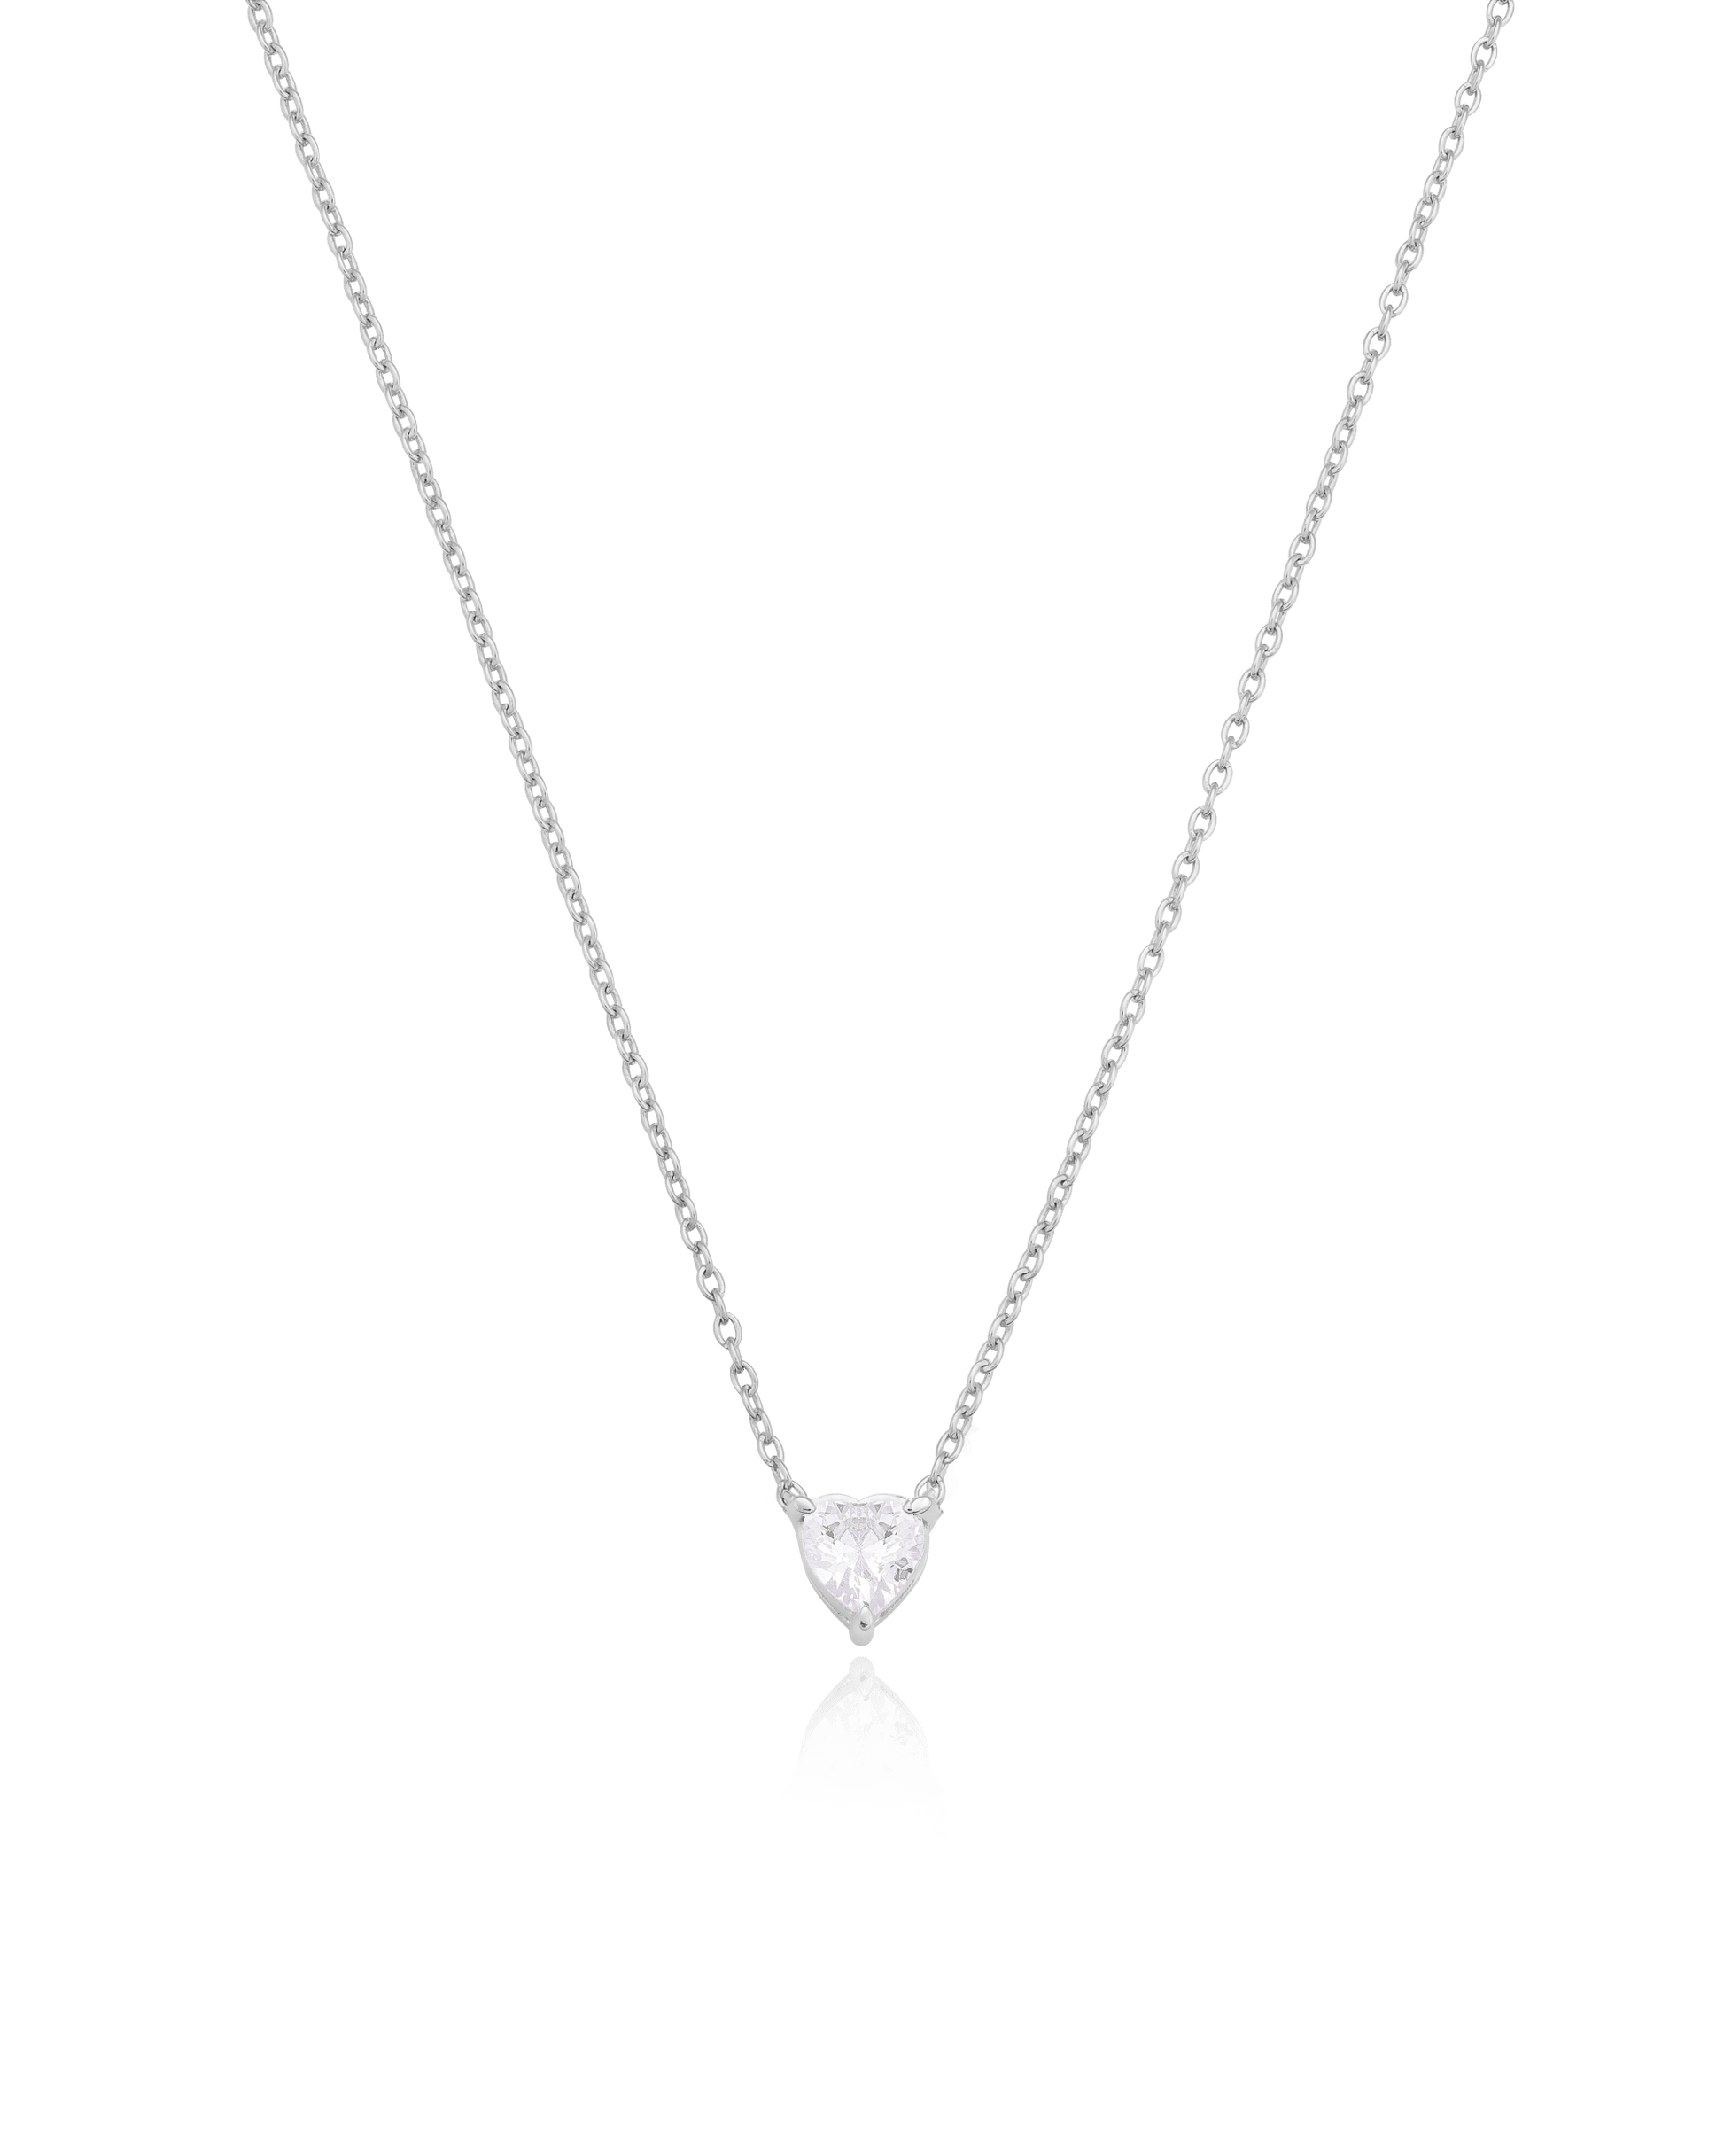 Heart Solitaire Diamond Necklace - 14K White Gold Necklaces magal-dev 